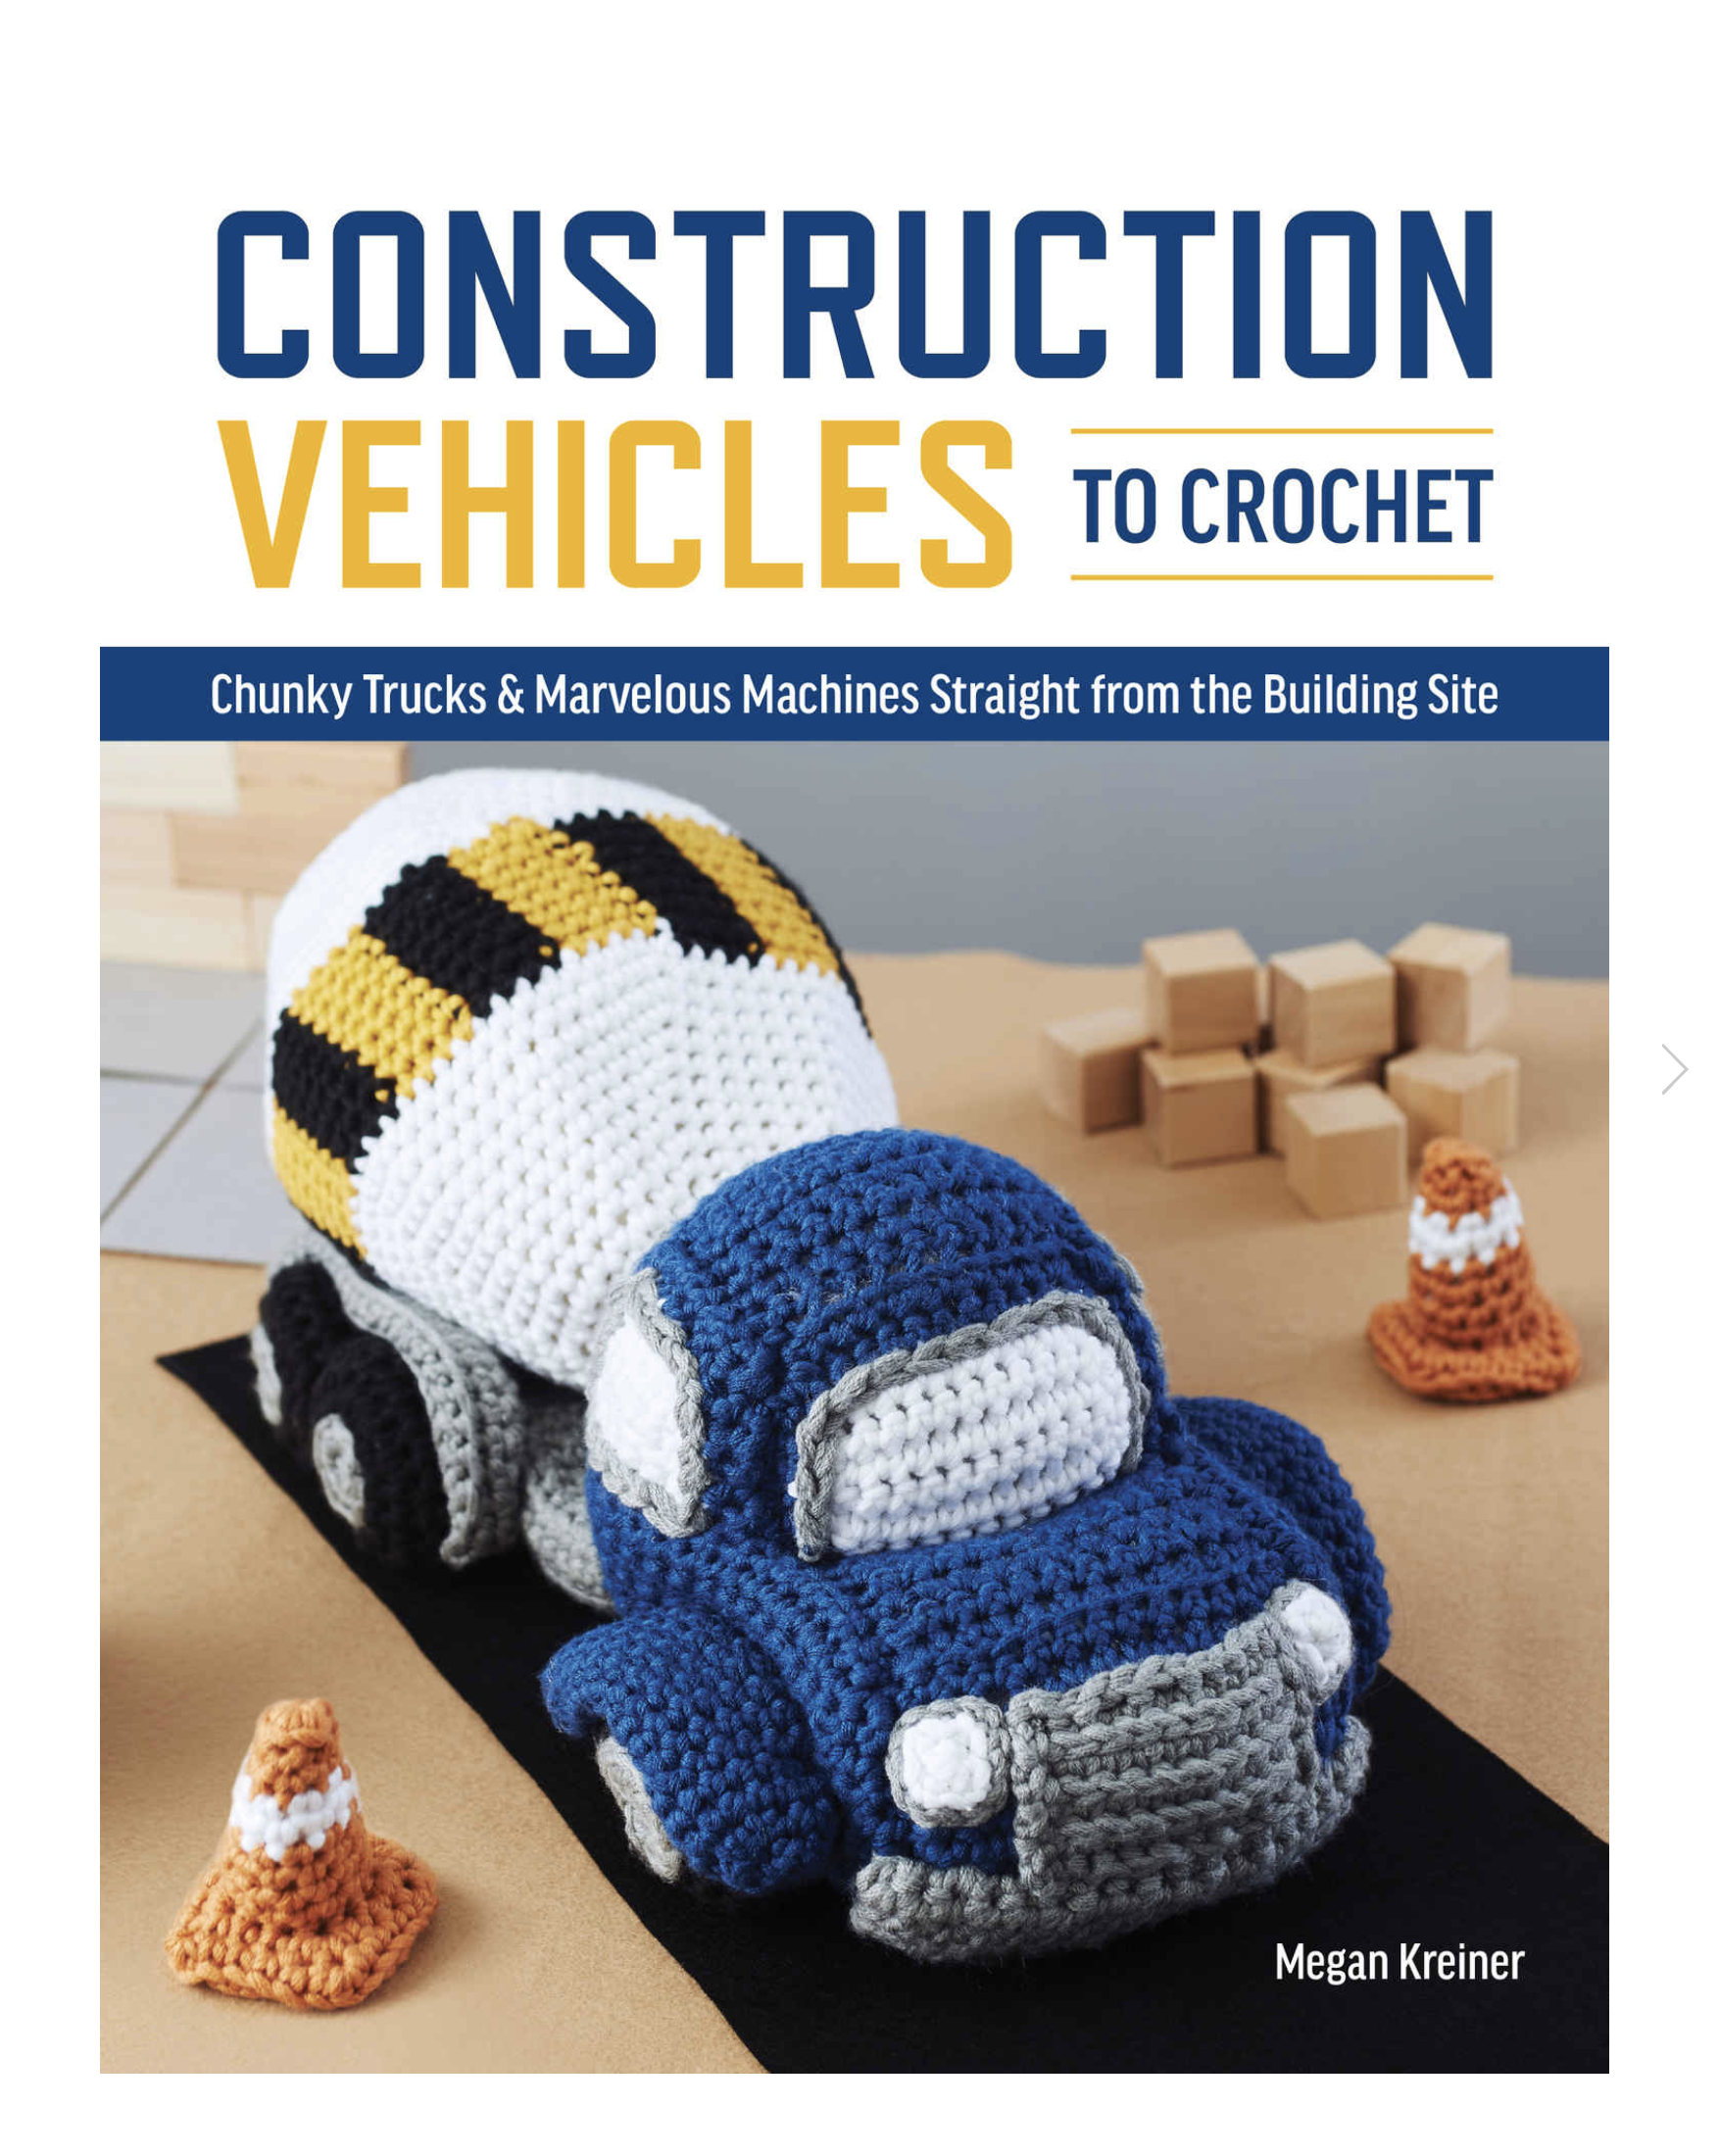 construction vehicles to crochet by megan kreiner book cover image